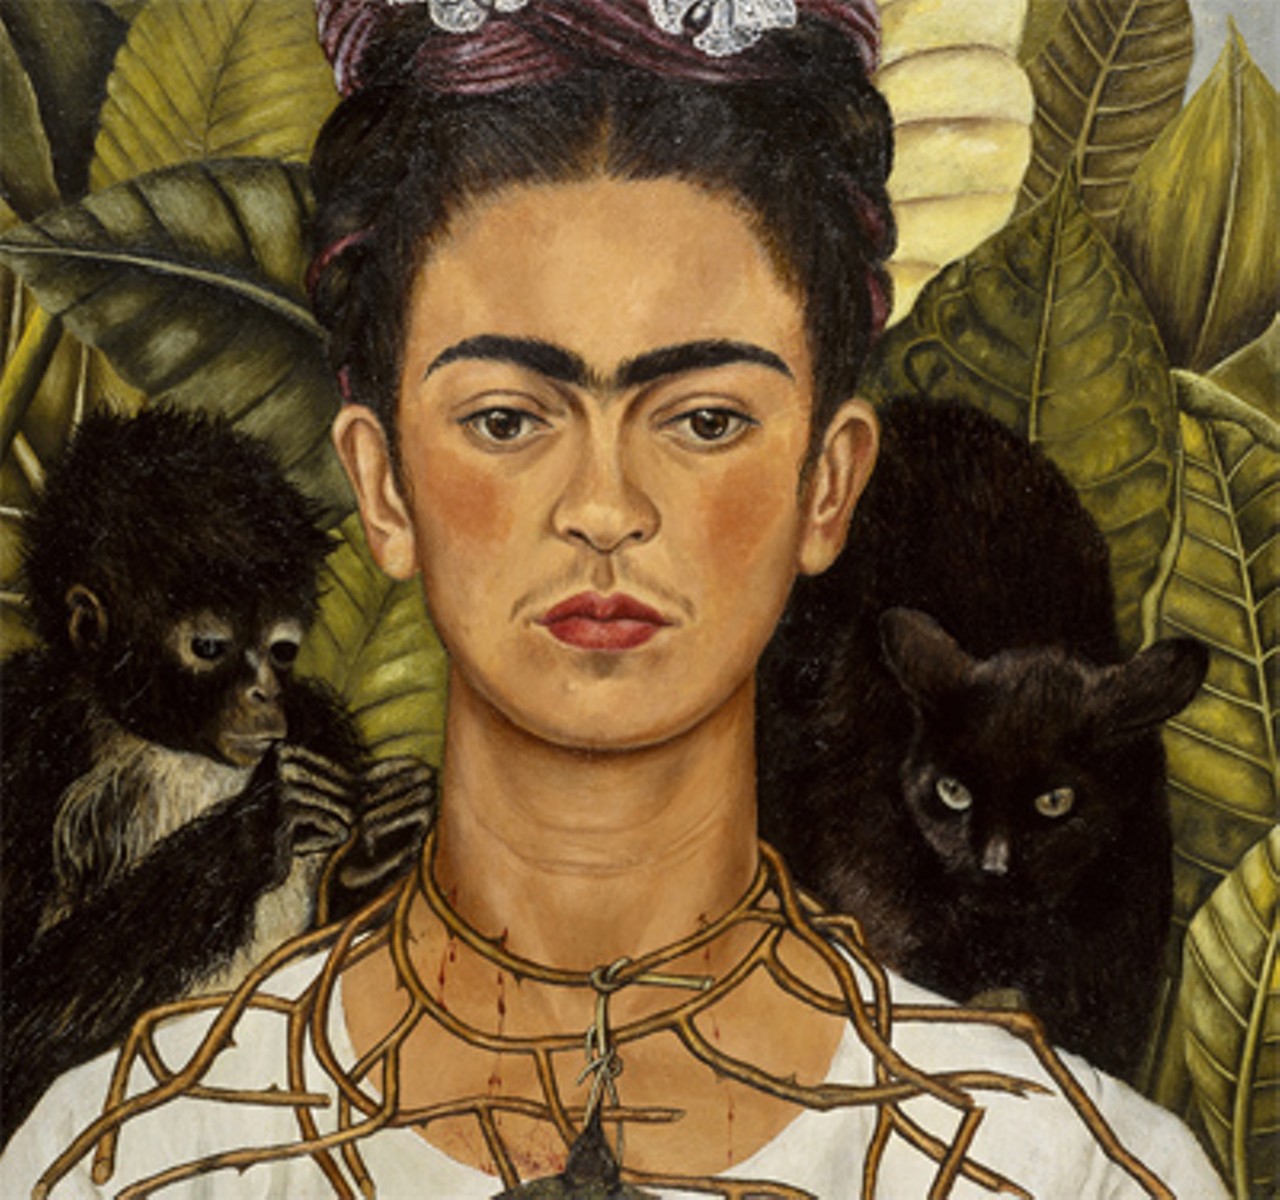 Surrealist Mexican painter Frida Kahlo (1907-1954), who often painted self-portraits that expressed her pain and sexuality.